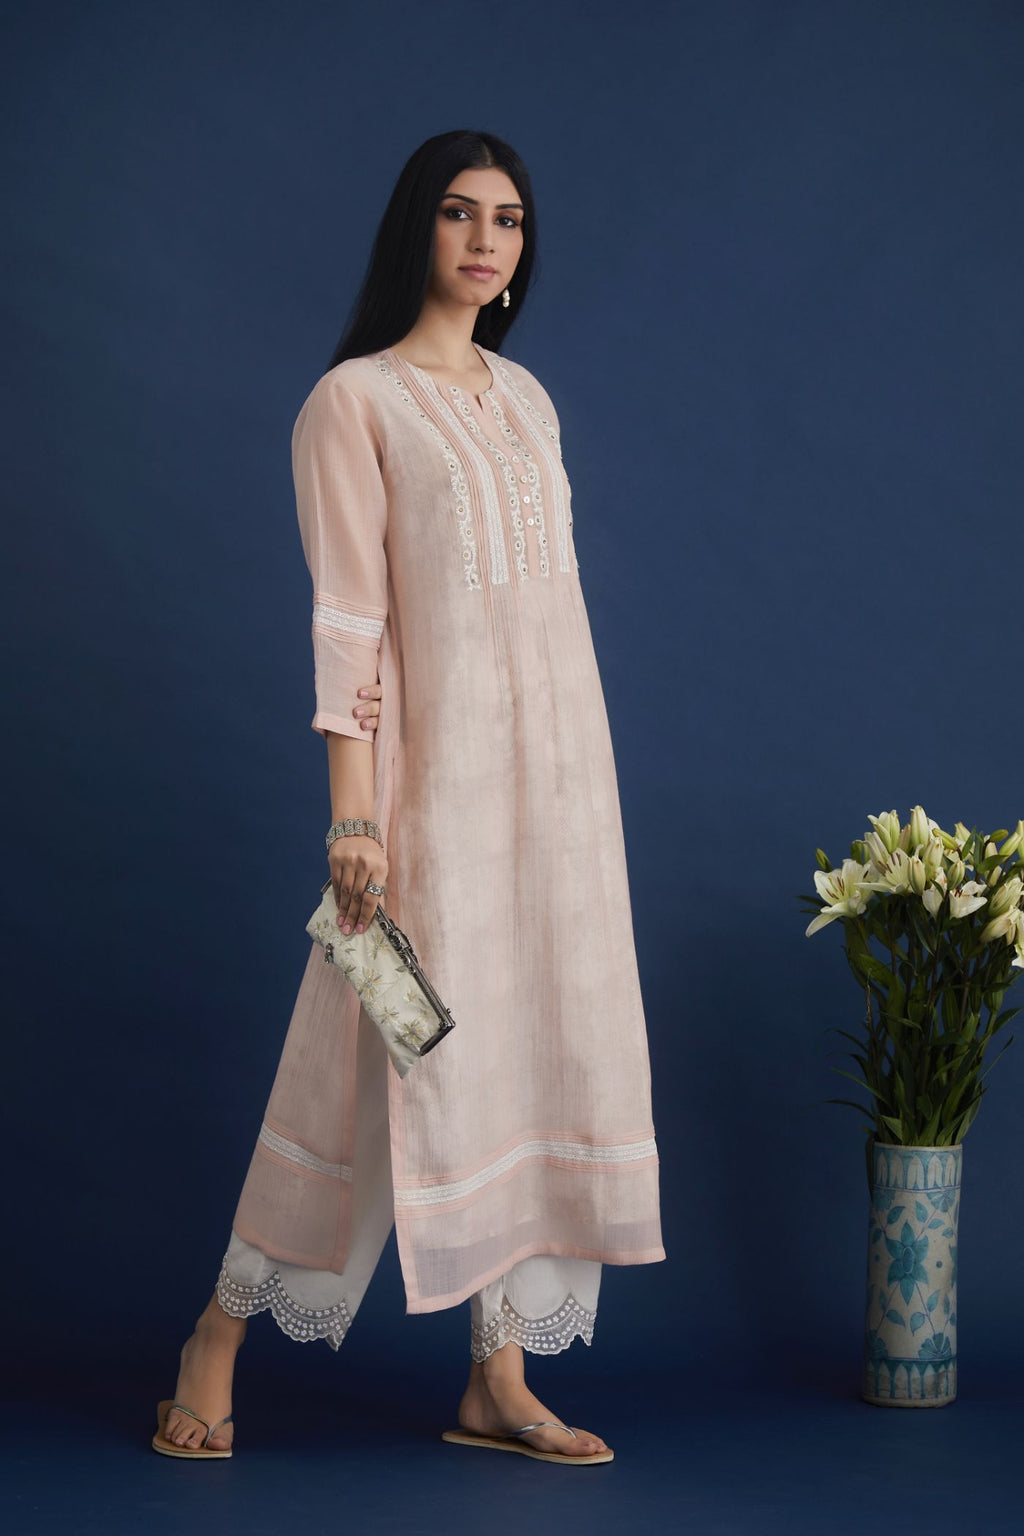 Double layered cotton chanderi kurta set with lace and pintucks detailing and hand block printed cotton slip inside